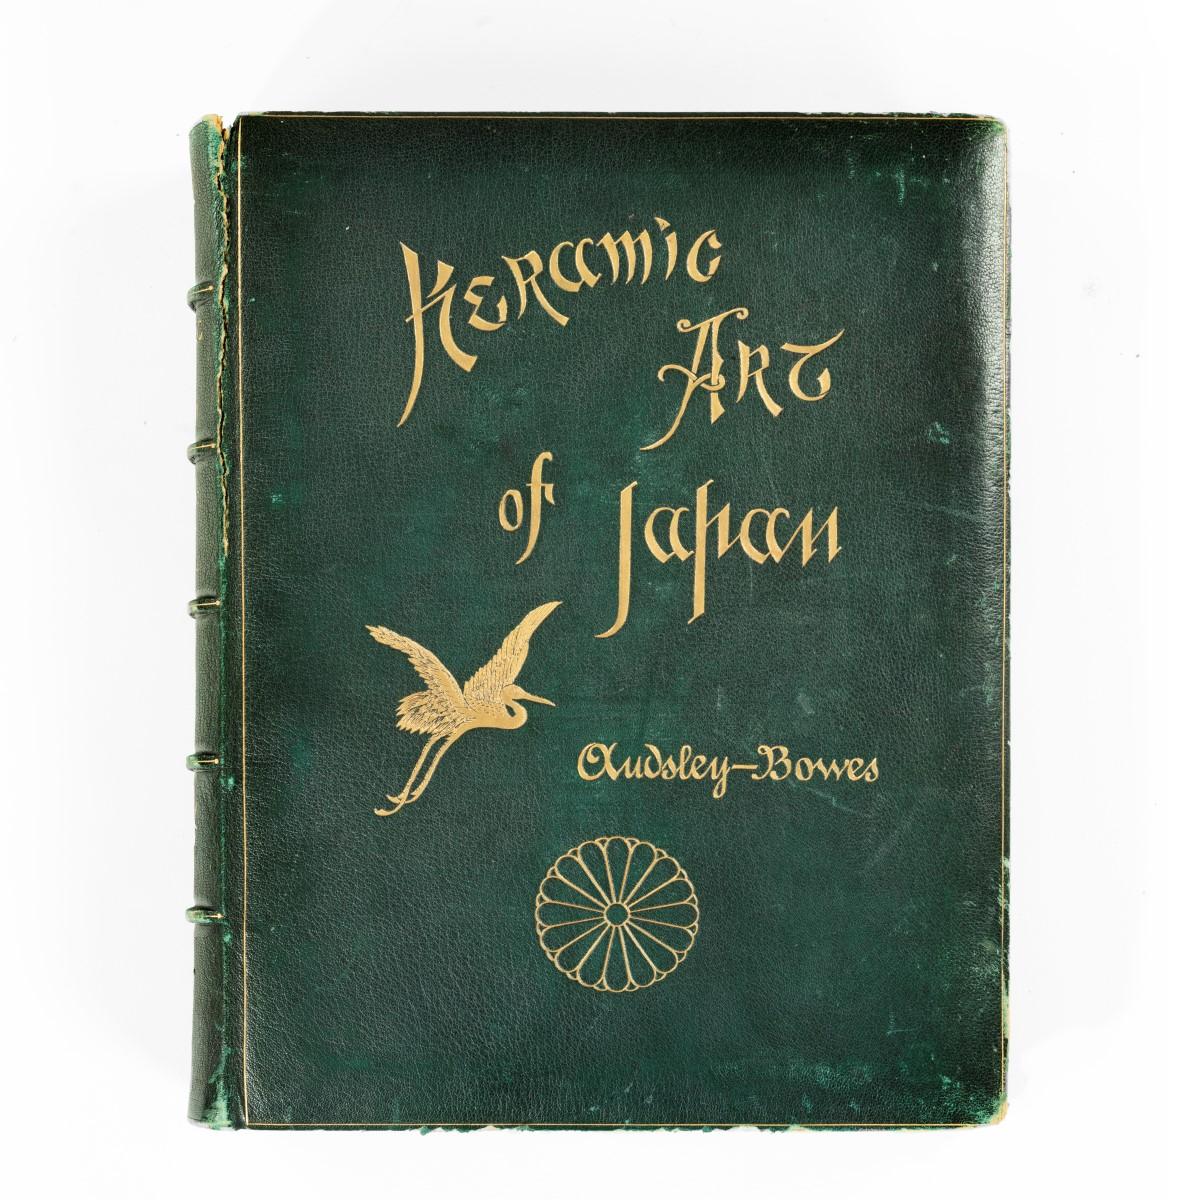 Audsley, George Ashdown and James, Lord Bowes ‘The Keramic Art of Japan’, Liverpool and London, Henry Sotheran, 1875. 2 volumes, first edition hardback folio including 41 coloured and gilded chromolithographs and 12 pages of marks and monograms, in